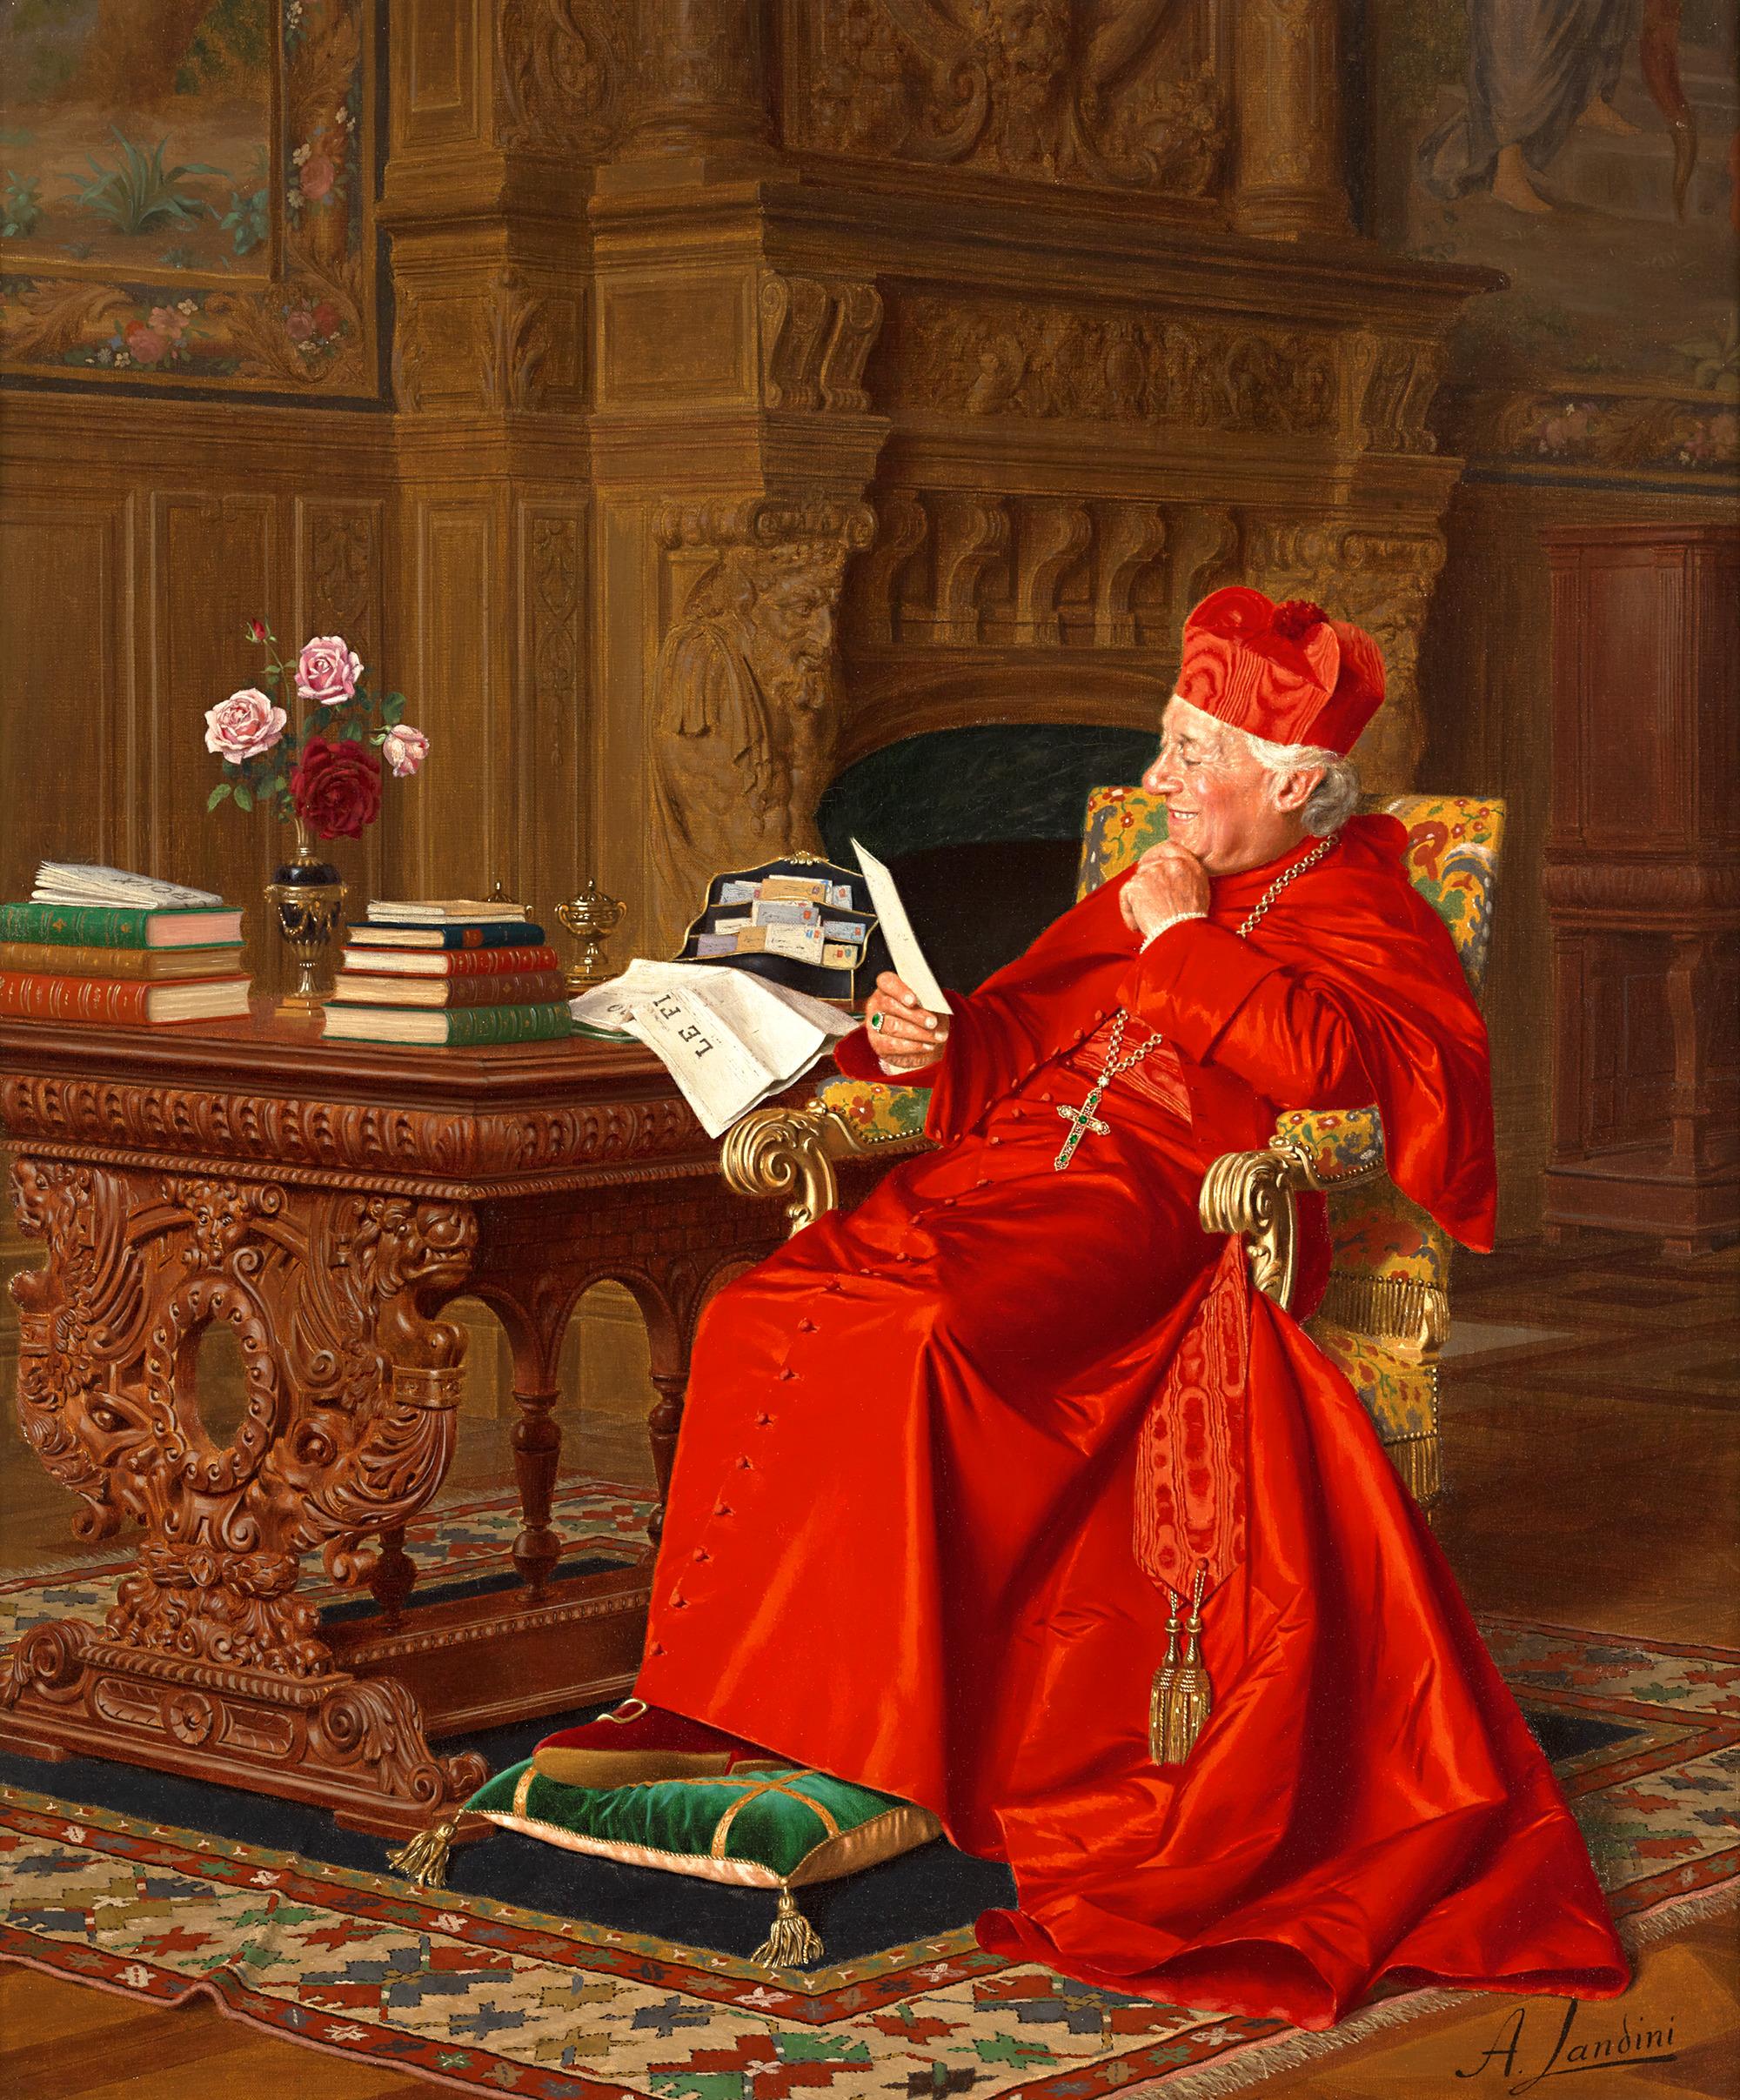 Andrea Landini
1847-1935 Italian 

Good News

Signed “A. Landini” (lower left)
Oil on canvas

A cardinal grins while contemplating the contents of a letter in this work by Italian painter Andrea Landini. Entitled Good News, the painting displays a